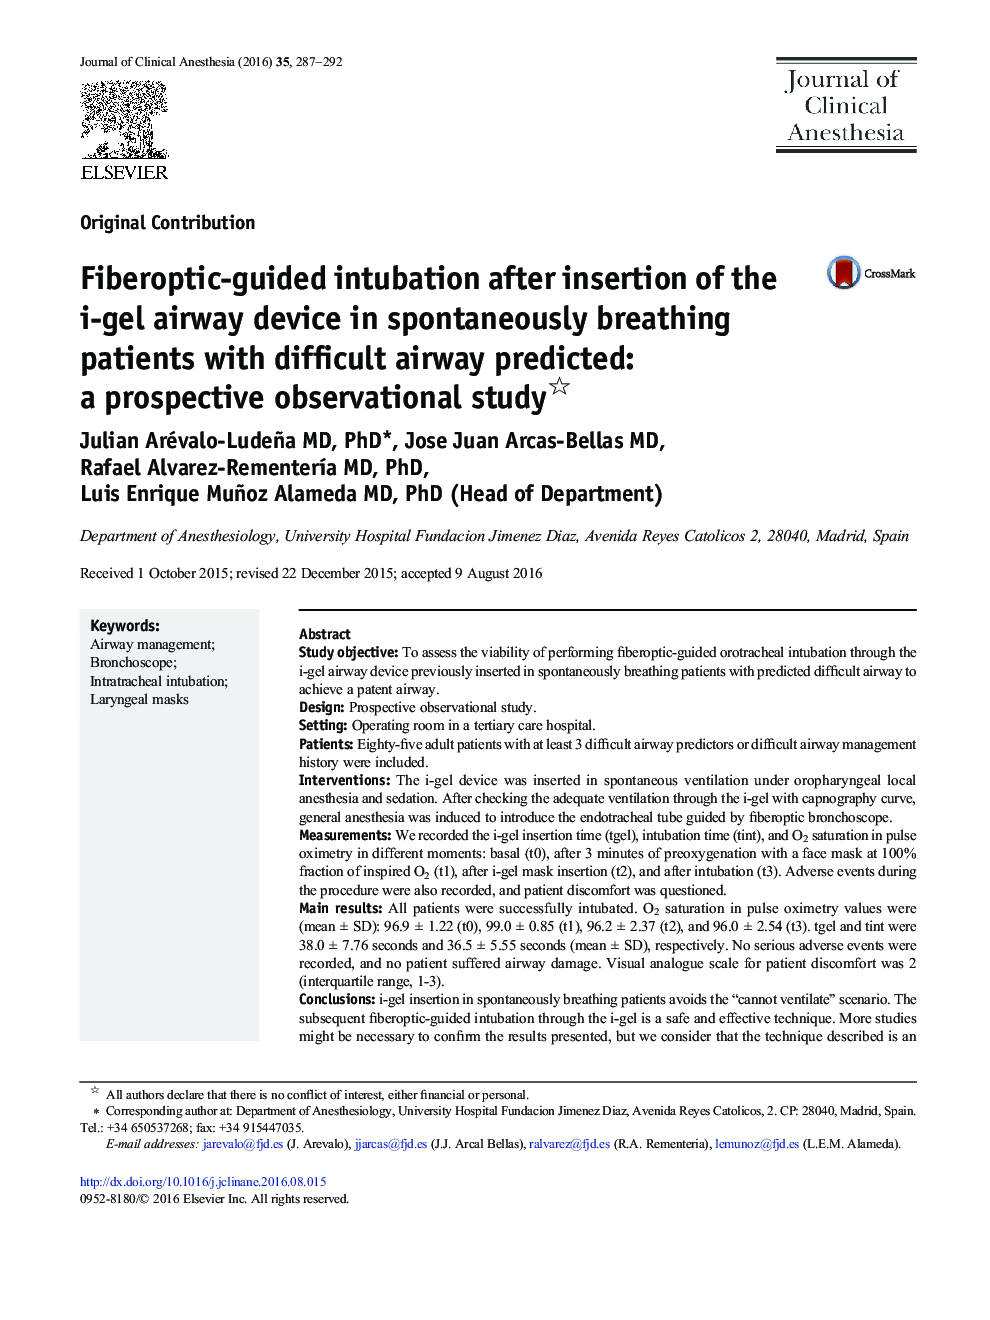 Fiberoptic-guided intubation after insertion of the i-gel airway device in spontaneously breathing patients with difficult airway predicted: a prospective observational study